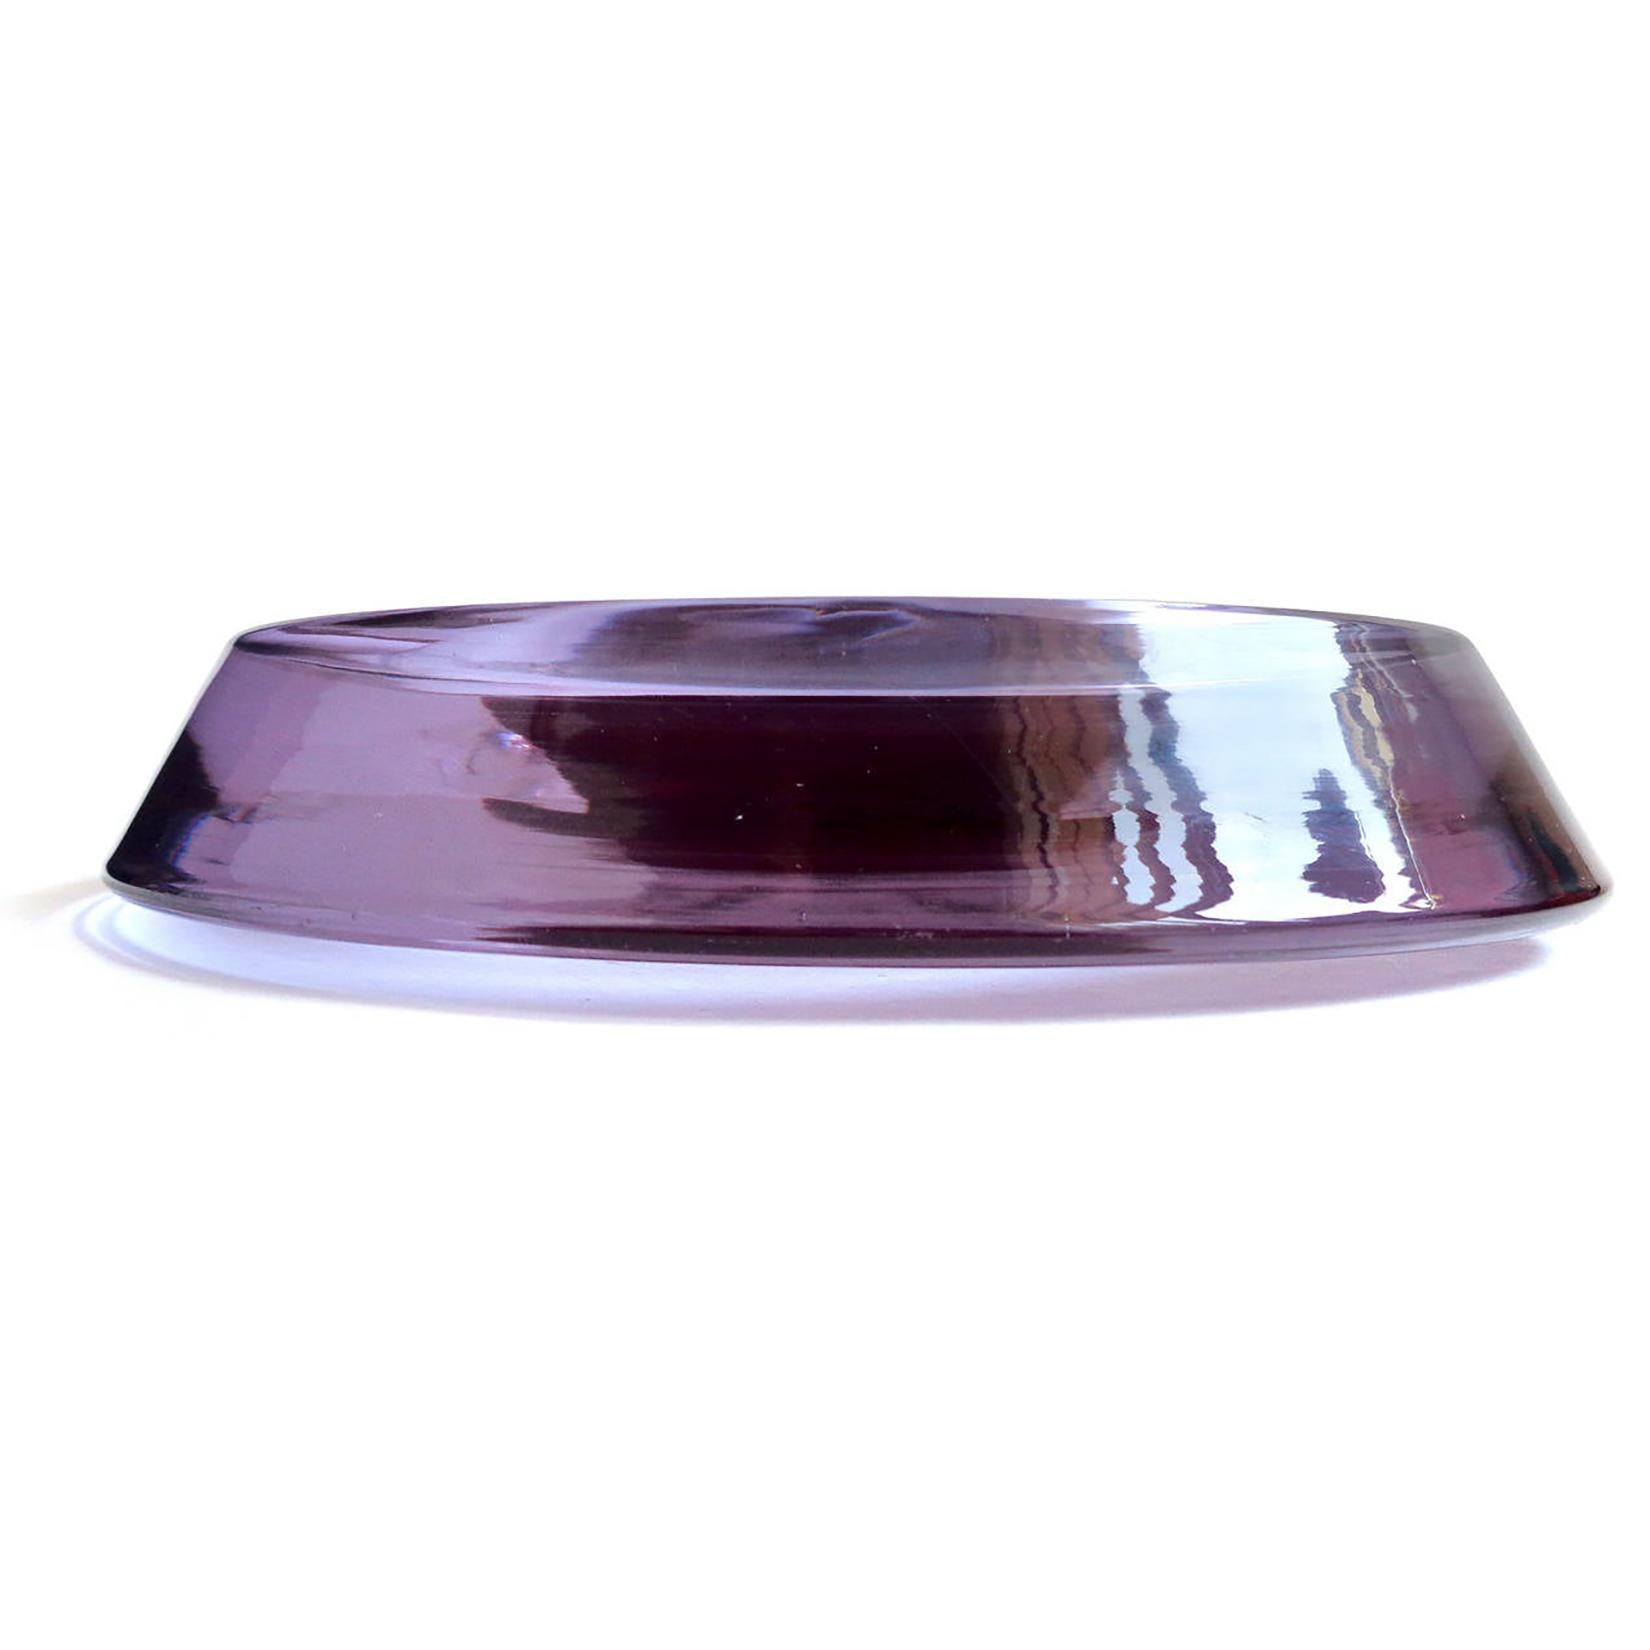 Space Age Murano Sommerso Purple Alexandrite Red Italian Art Glass Hovering UFO Bowl